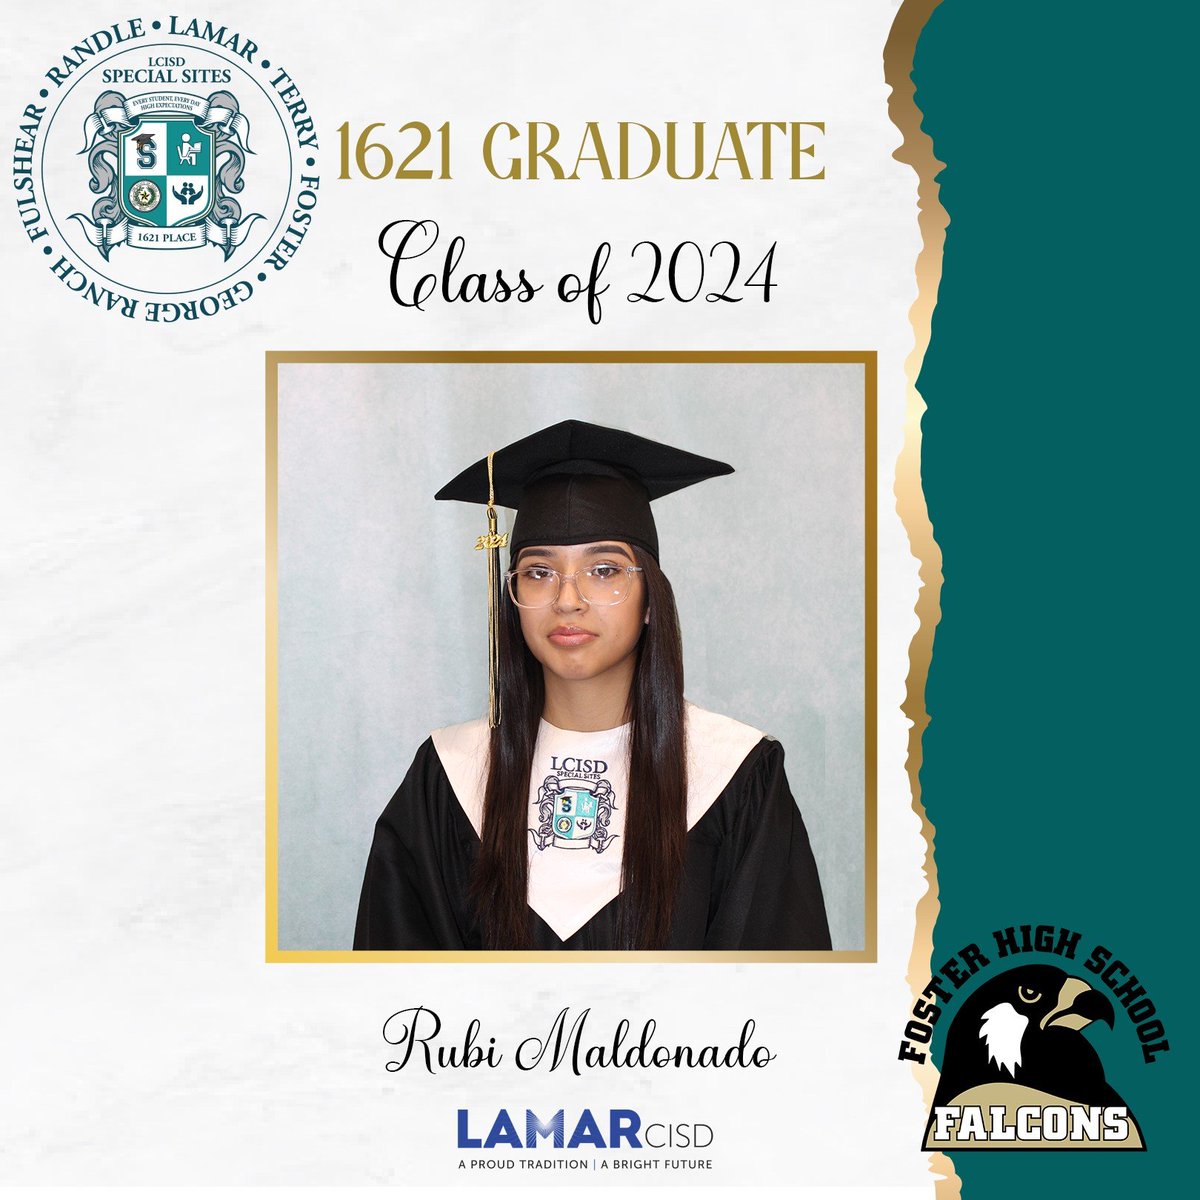 🎓Special Sites proudly congratulates Rubi Maldonado on being a confirmed graduate of Foster High School! Your hard work & determination at 1621 Place, LCISD’s ONLY School of Choice, have paid off, making you an official LCISD Graduate! Best wishes! #1621Place @FosterHSNews